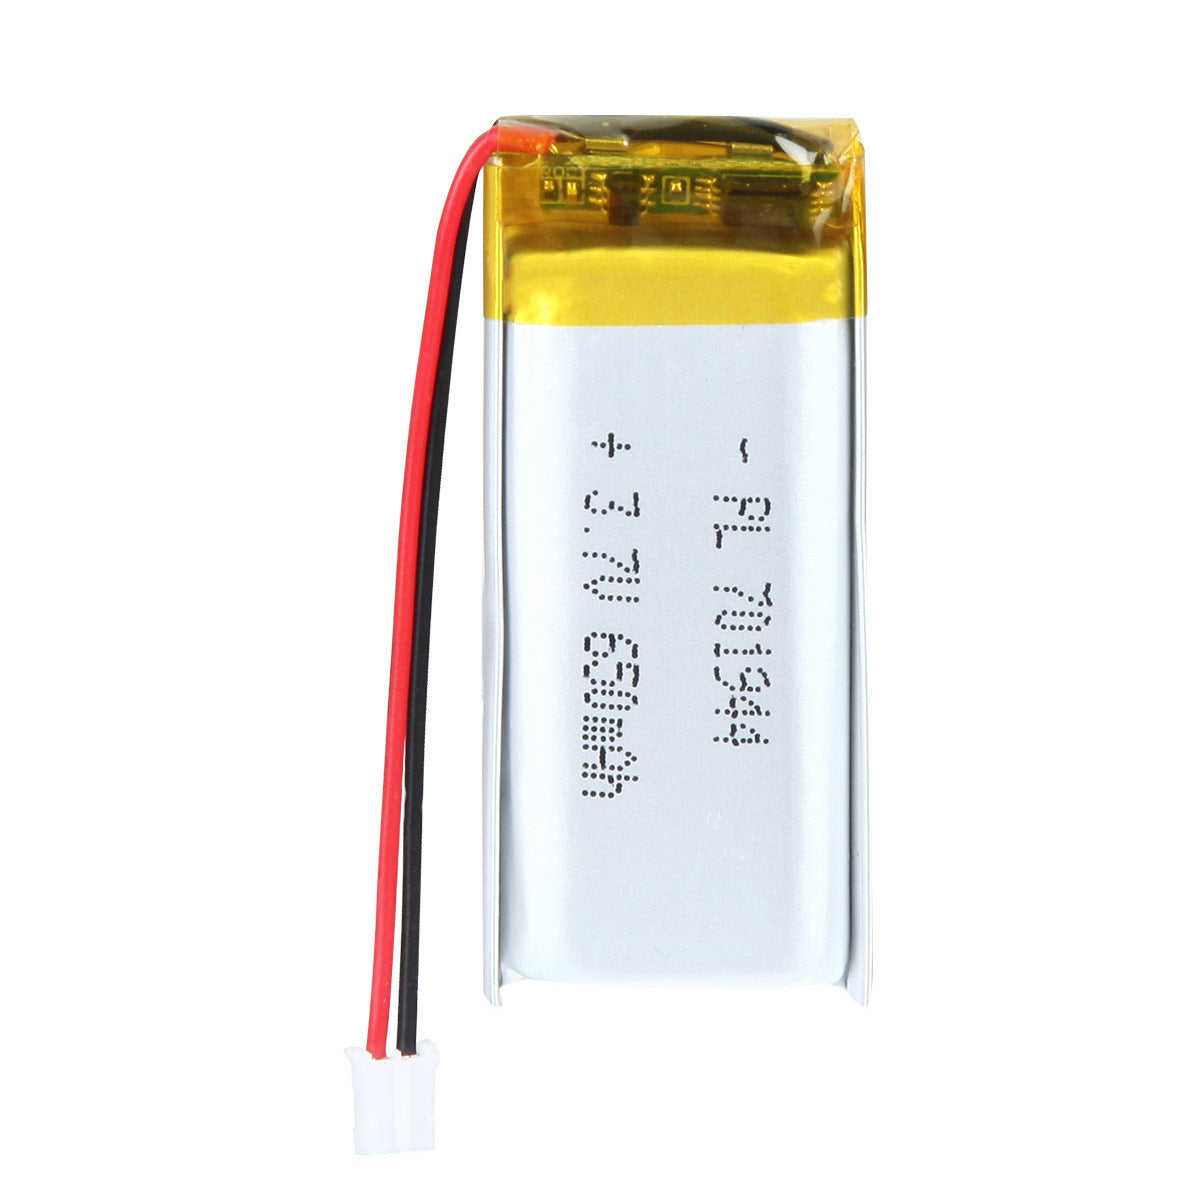 3.7V 701944 650mAh Rechargeable Lithium Polymer Battery